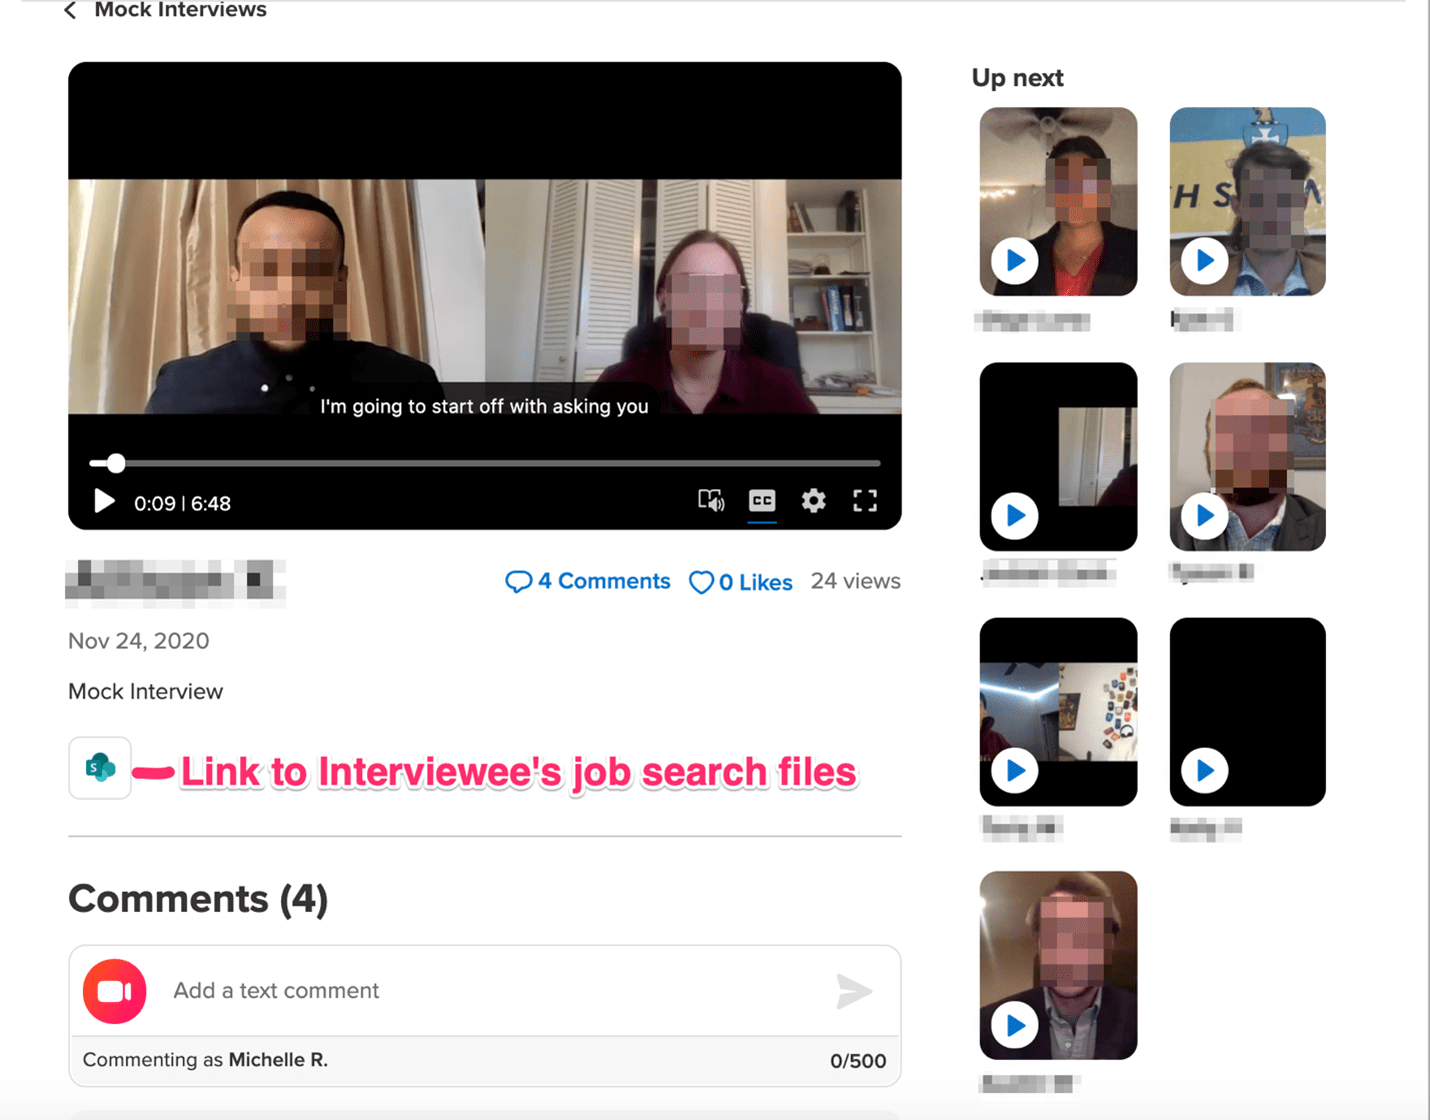 Screenshot showing a FlipGrid discussion stage.